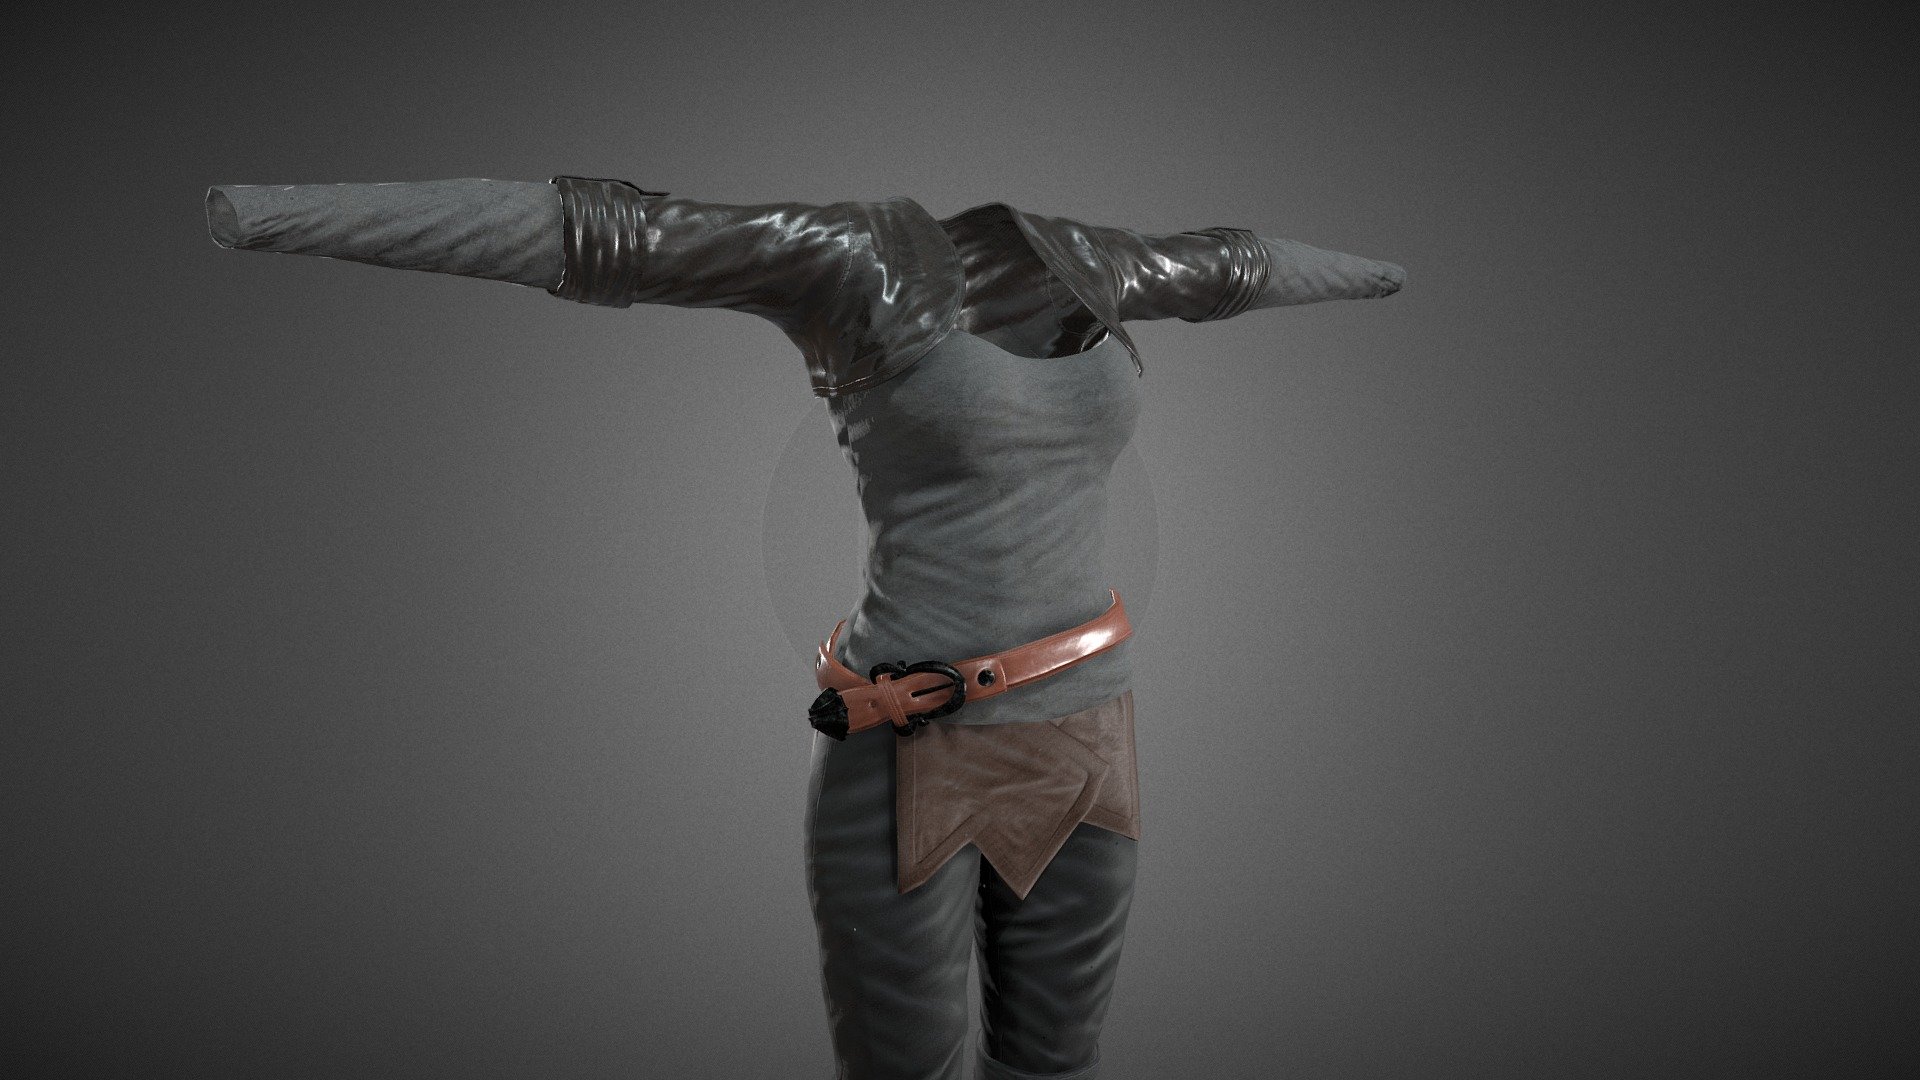 CG StudioX Present :
Female Survivor Outfit lowpoly/PBR




This is Female Survivor Outfit Comes with Specular and Metalness PBR.

The photo been rendered using Marmoset Toolbag 3 (real time game engine )


Features :



Comes with Specular and Metalness PBR 4K texture .

Good topology.

Low polygon geometry.

The Model is prefect for game for both Specular workflow as in Unity and Metalness as in Unreal engine .

The model also rendered using Marmoset Toolbag 3 with both Specular and Metalness PBR and also included in the product with the full texture.

The product has ID map in every part for changing any part in the model .

The texture can be easily adjustable .


Texture :



ALL Texture [Albedo -Normal-Metalness -Roughness-Gloss-Specular-ID-AO] (4096*4096)

Three objects (Top-Pants-Boots) each one has it own UV set and textures.


Files :
Marmoset Toolbag 3 ,Maya,,FBX,OBj with all the textures.




Contact me for if you have any questions.
 - Female Survivor Outfit - Buy Royalty Free 3D model by CG StudioX (@CG_StudioX) 3d model